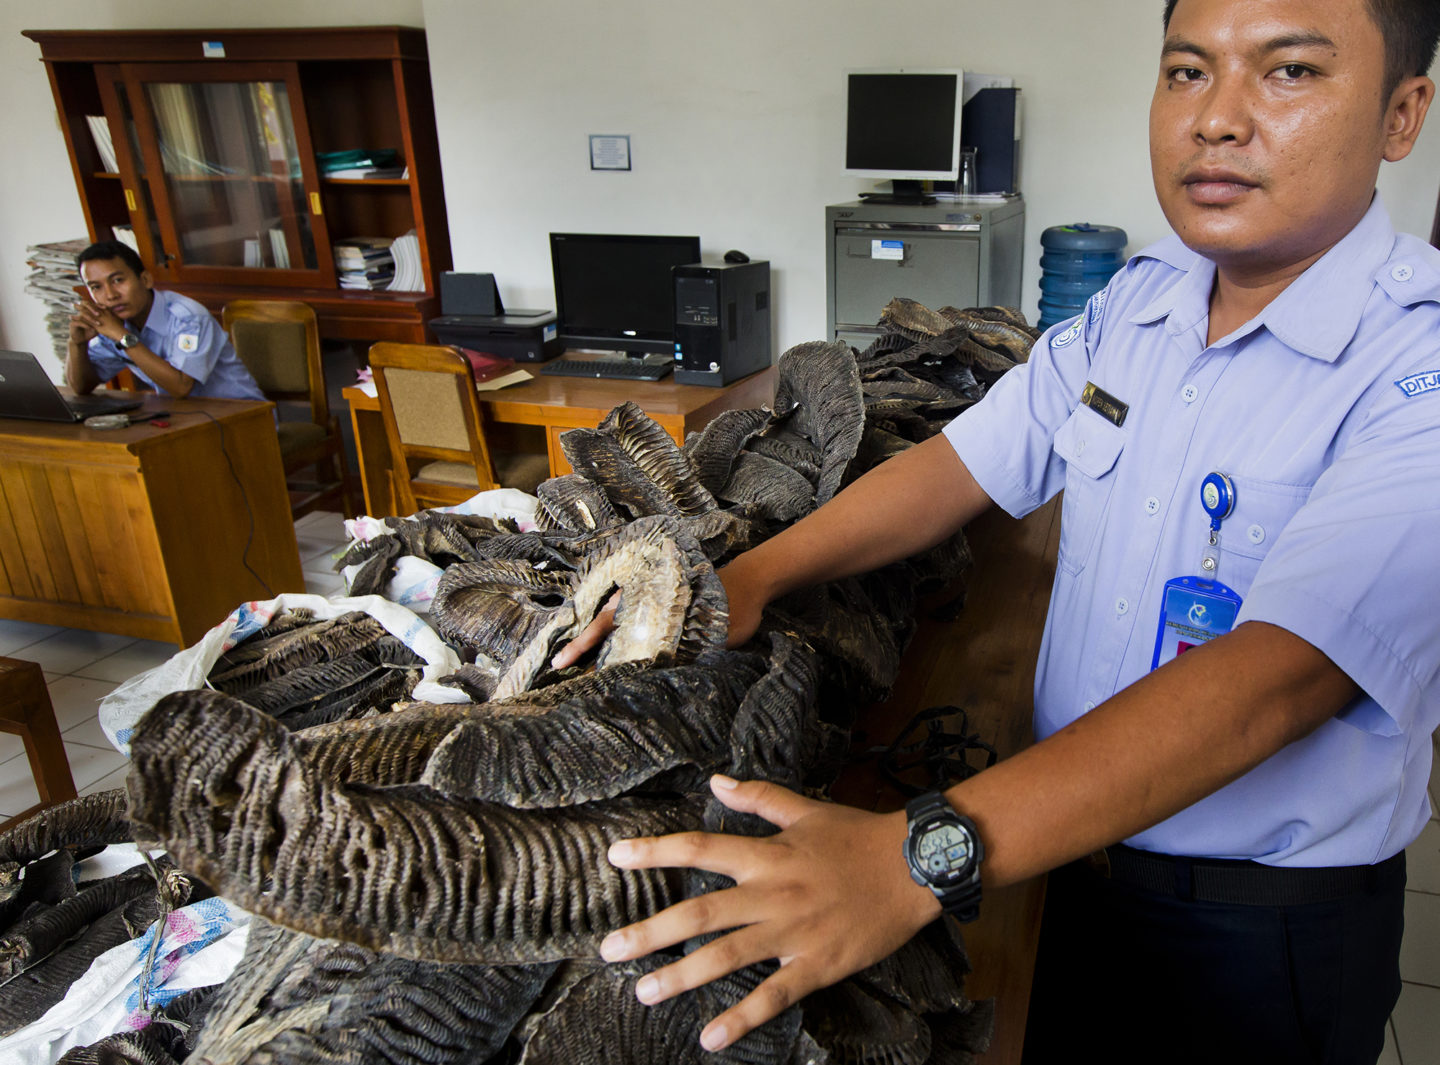 Ministry of Fisheries personnel display confiscated manta ray gills in their offices on the island of Bali in 2014. (Image: Paul Hilton)